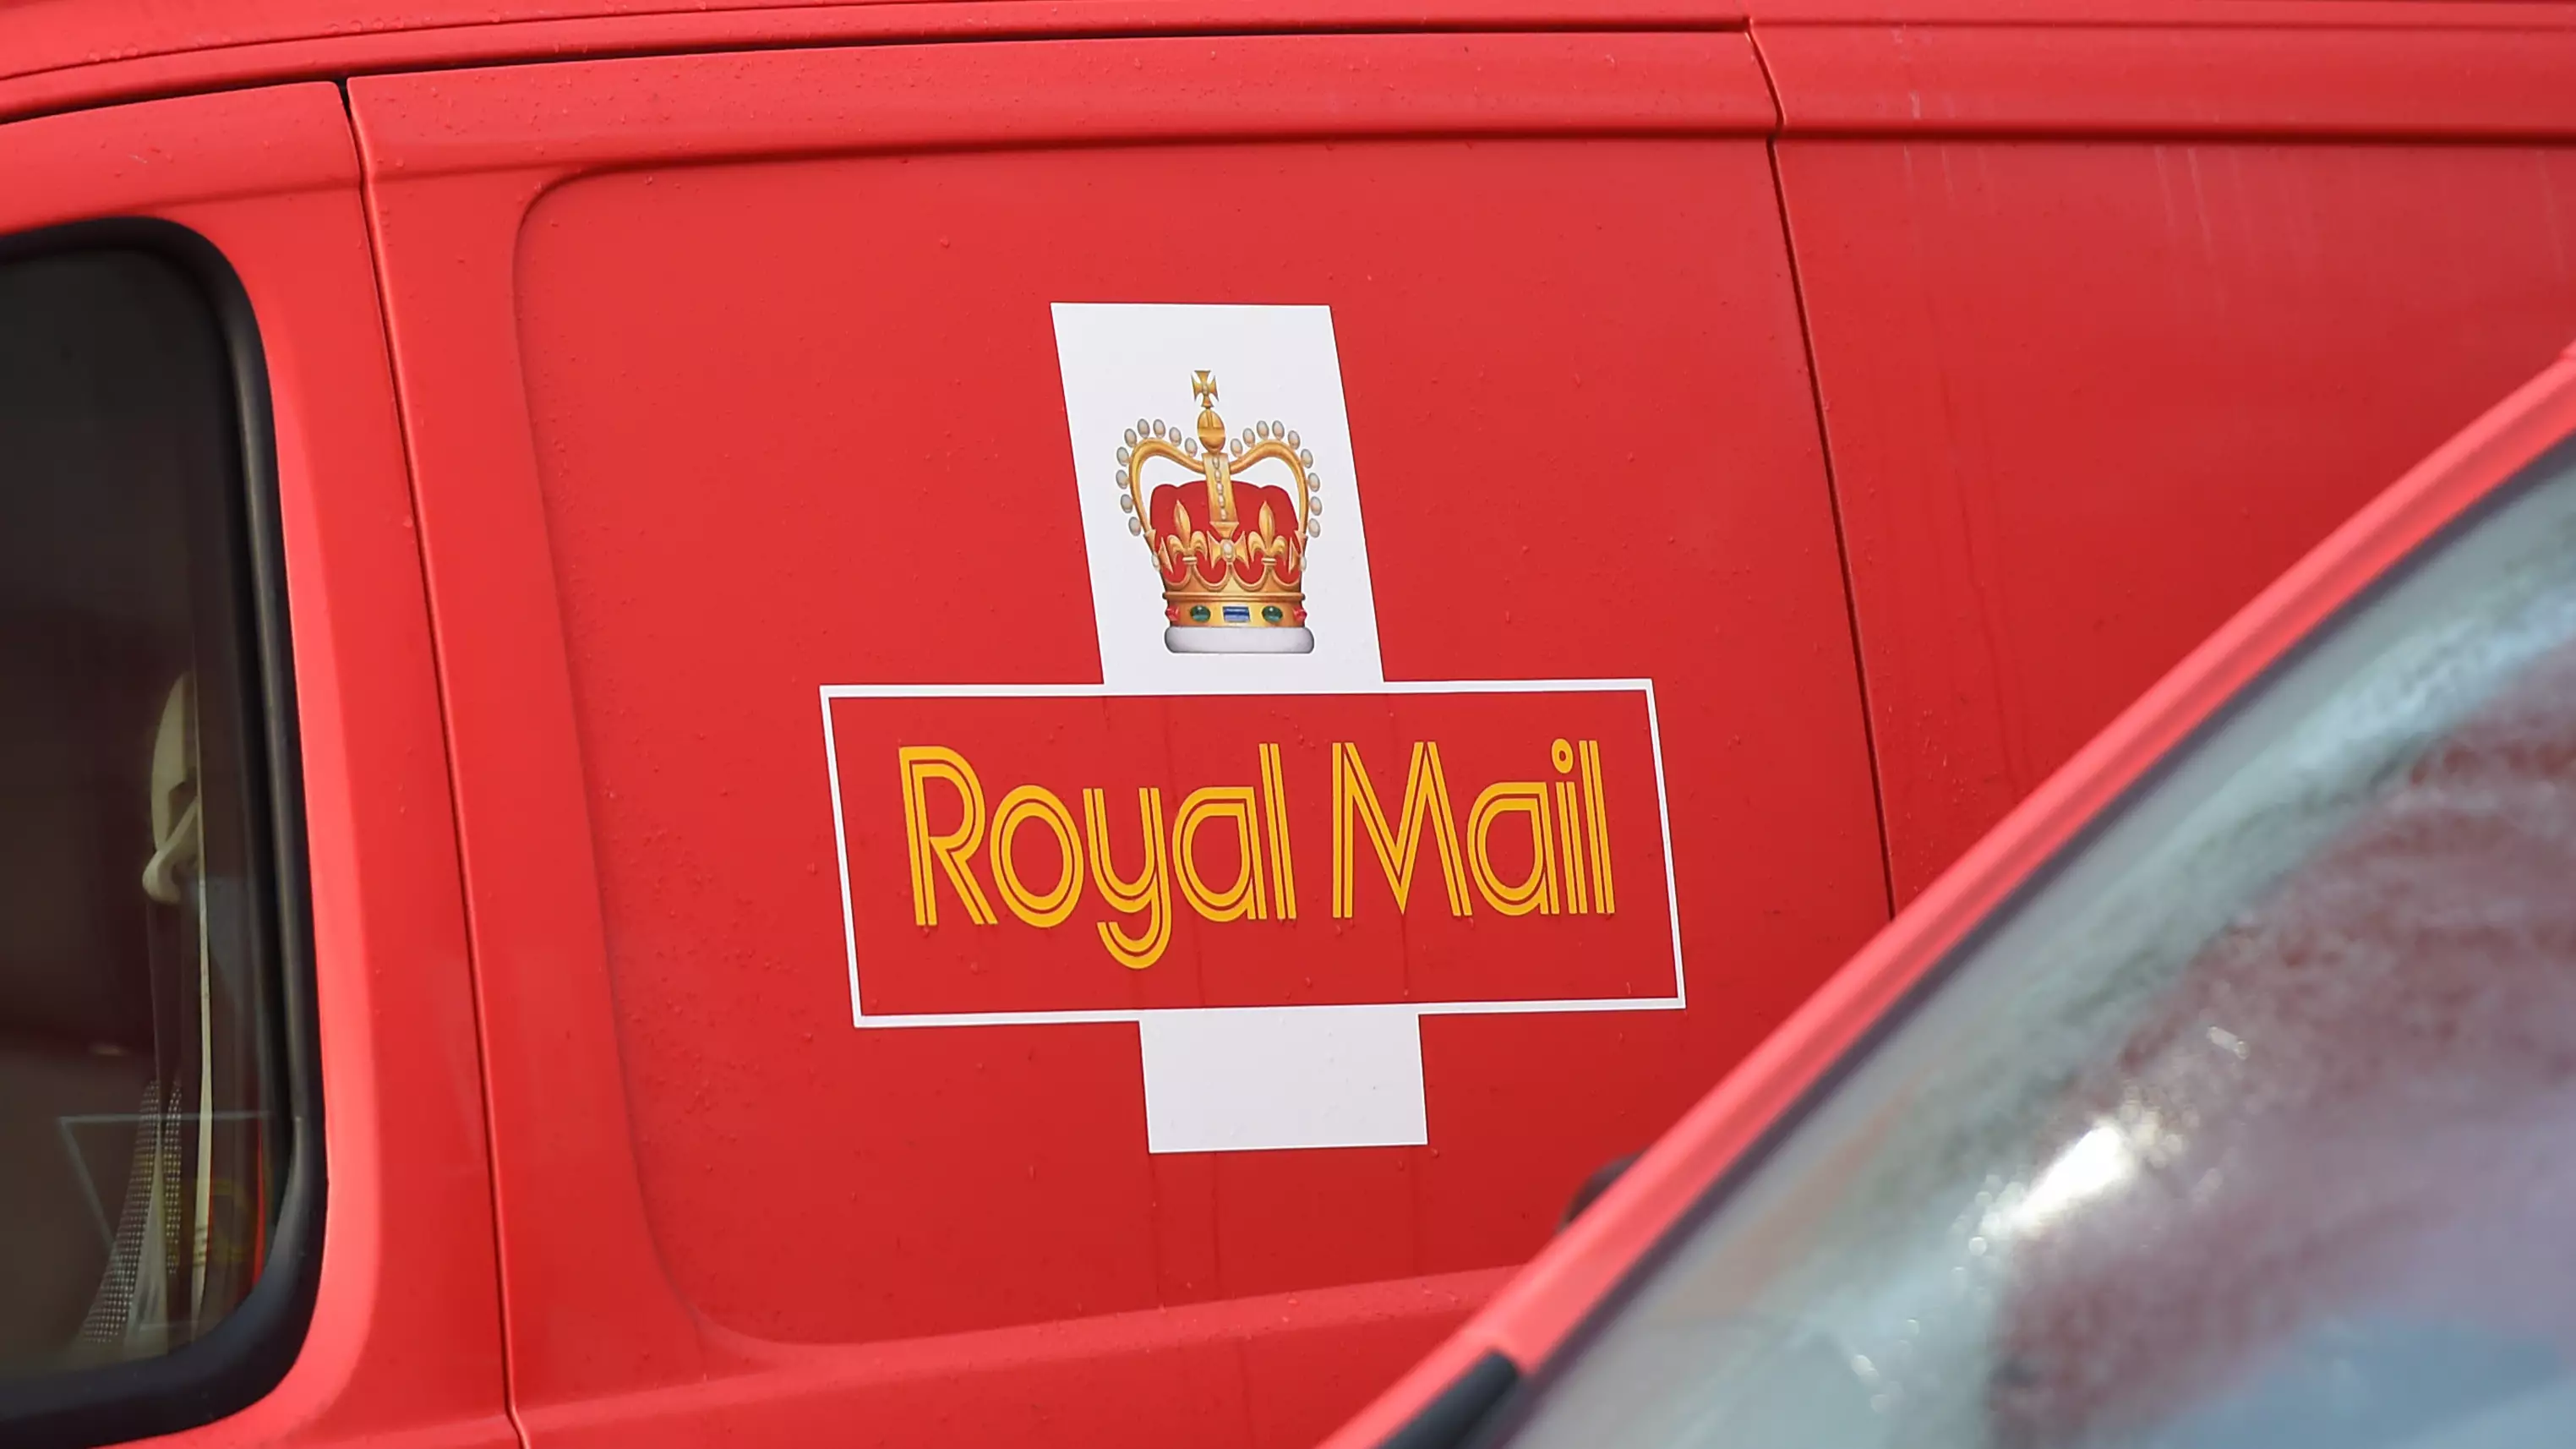 ​Martin Lewis Warns Shoppers Of 'Royal Mail' Scam Taking People's Bank Details​